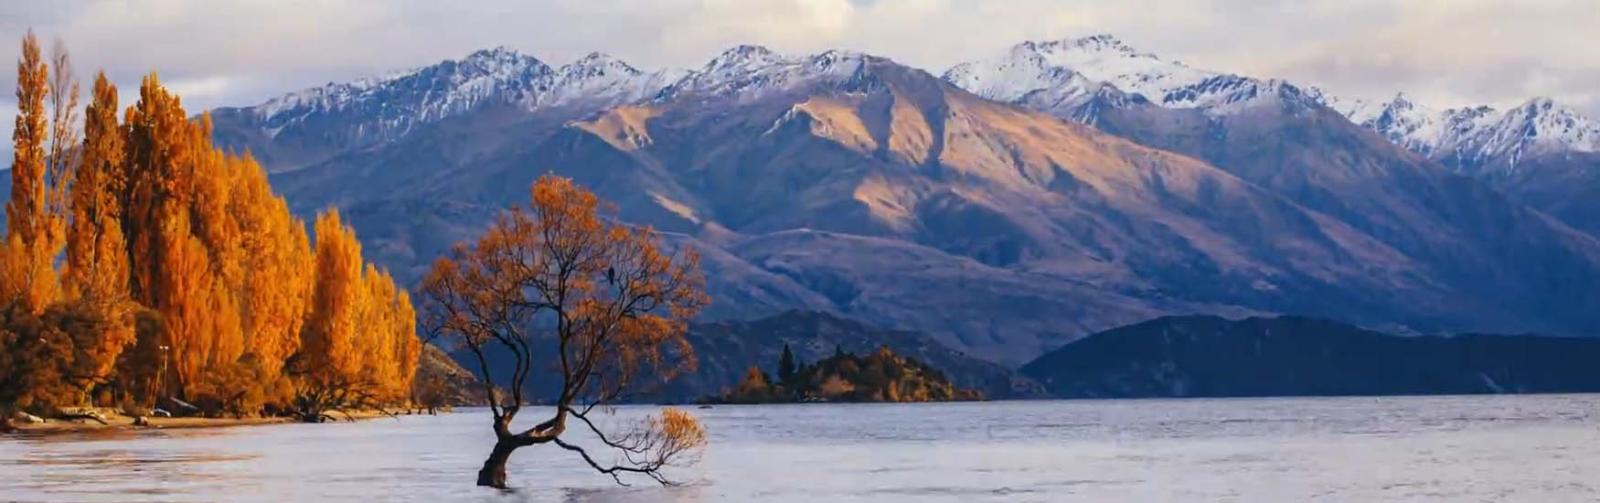 The Wanaka Tree with snow capped mountains